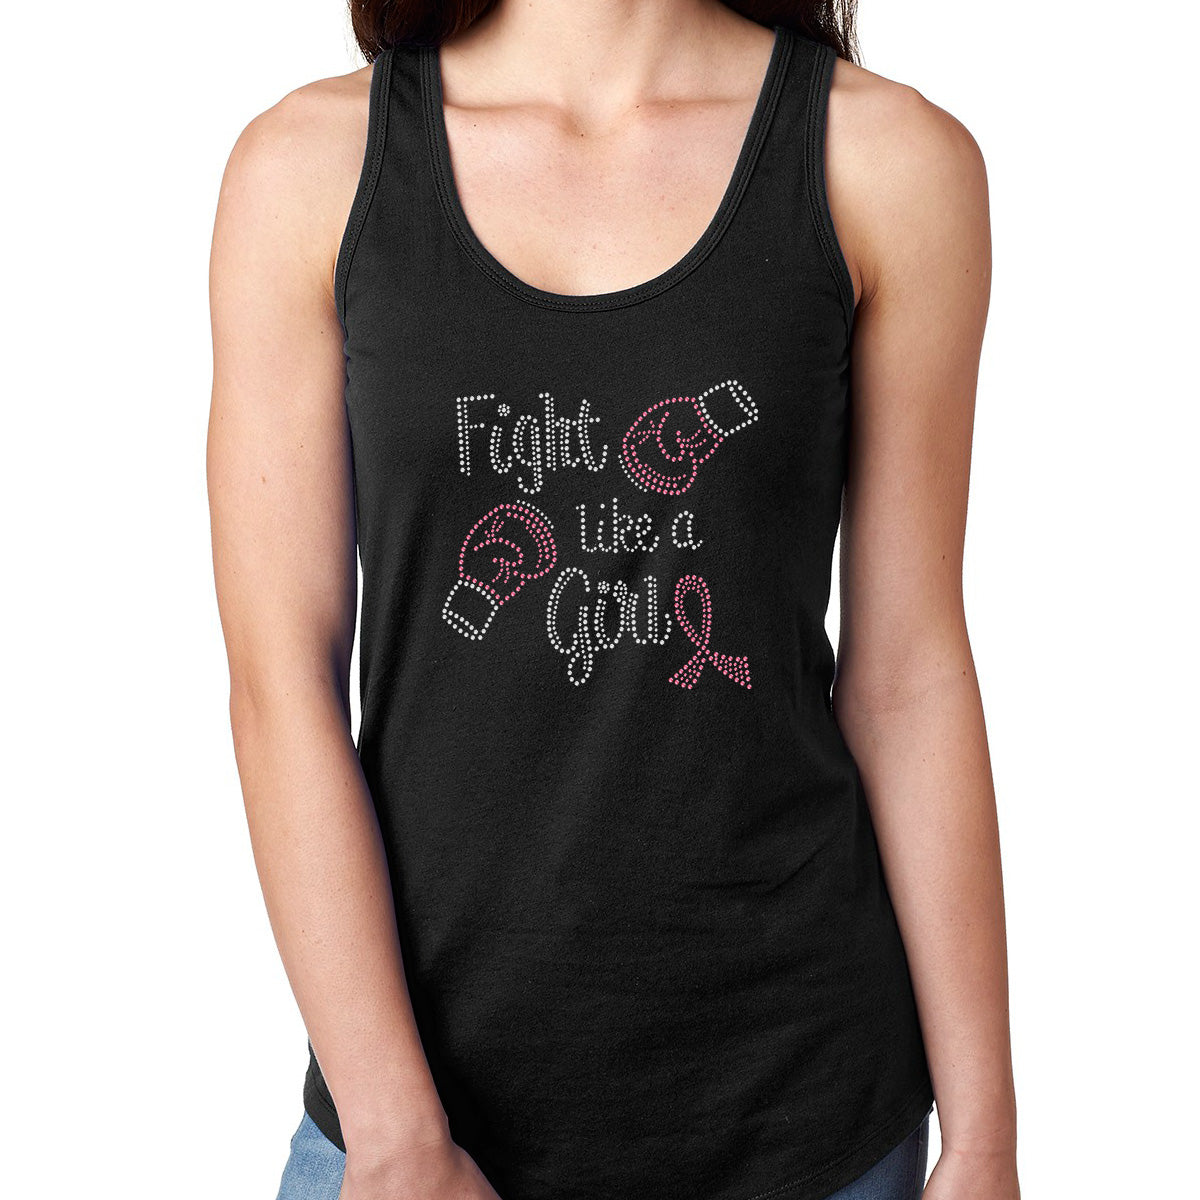 Womens T-Shirt Bling Black Fitted Tee Fight Like a Girl Gloves Pink Ribbon